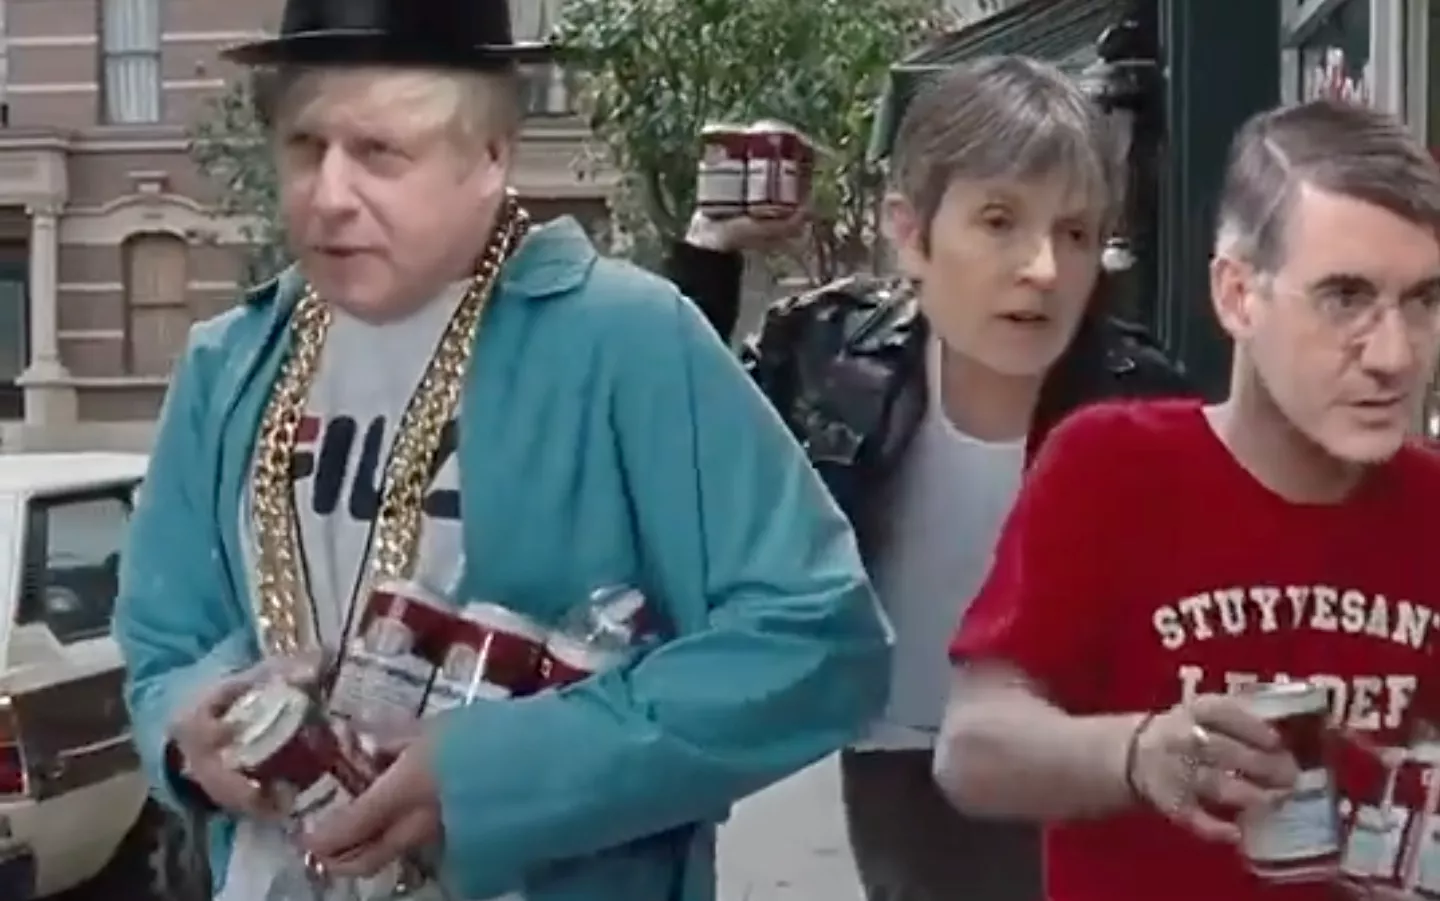 Boris Johnson fights for his right to party i underhållande video